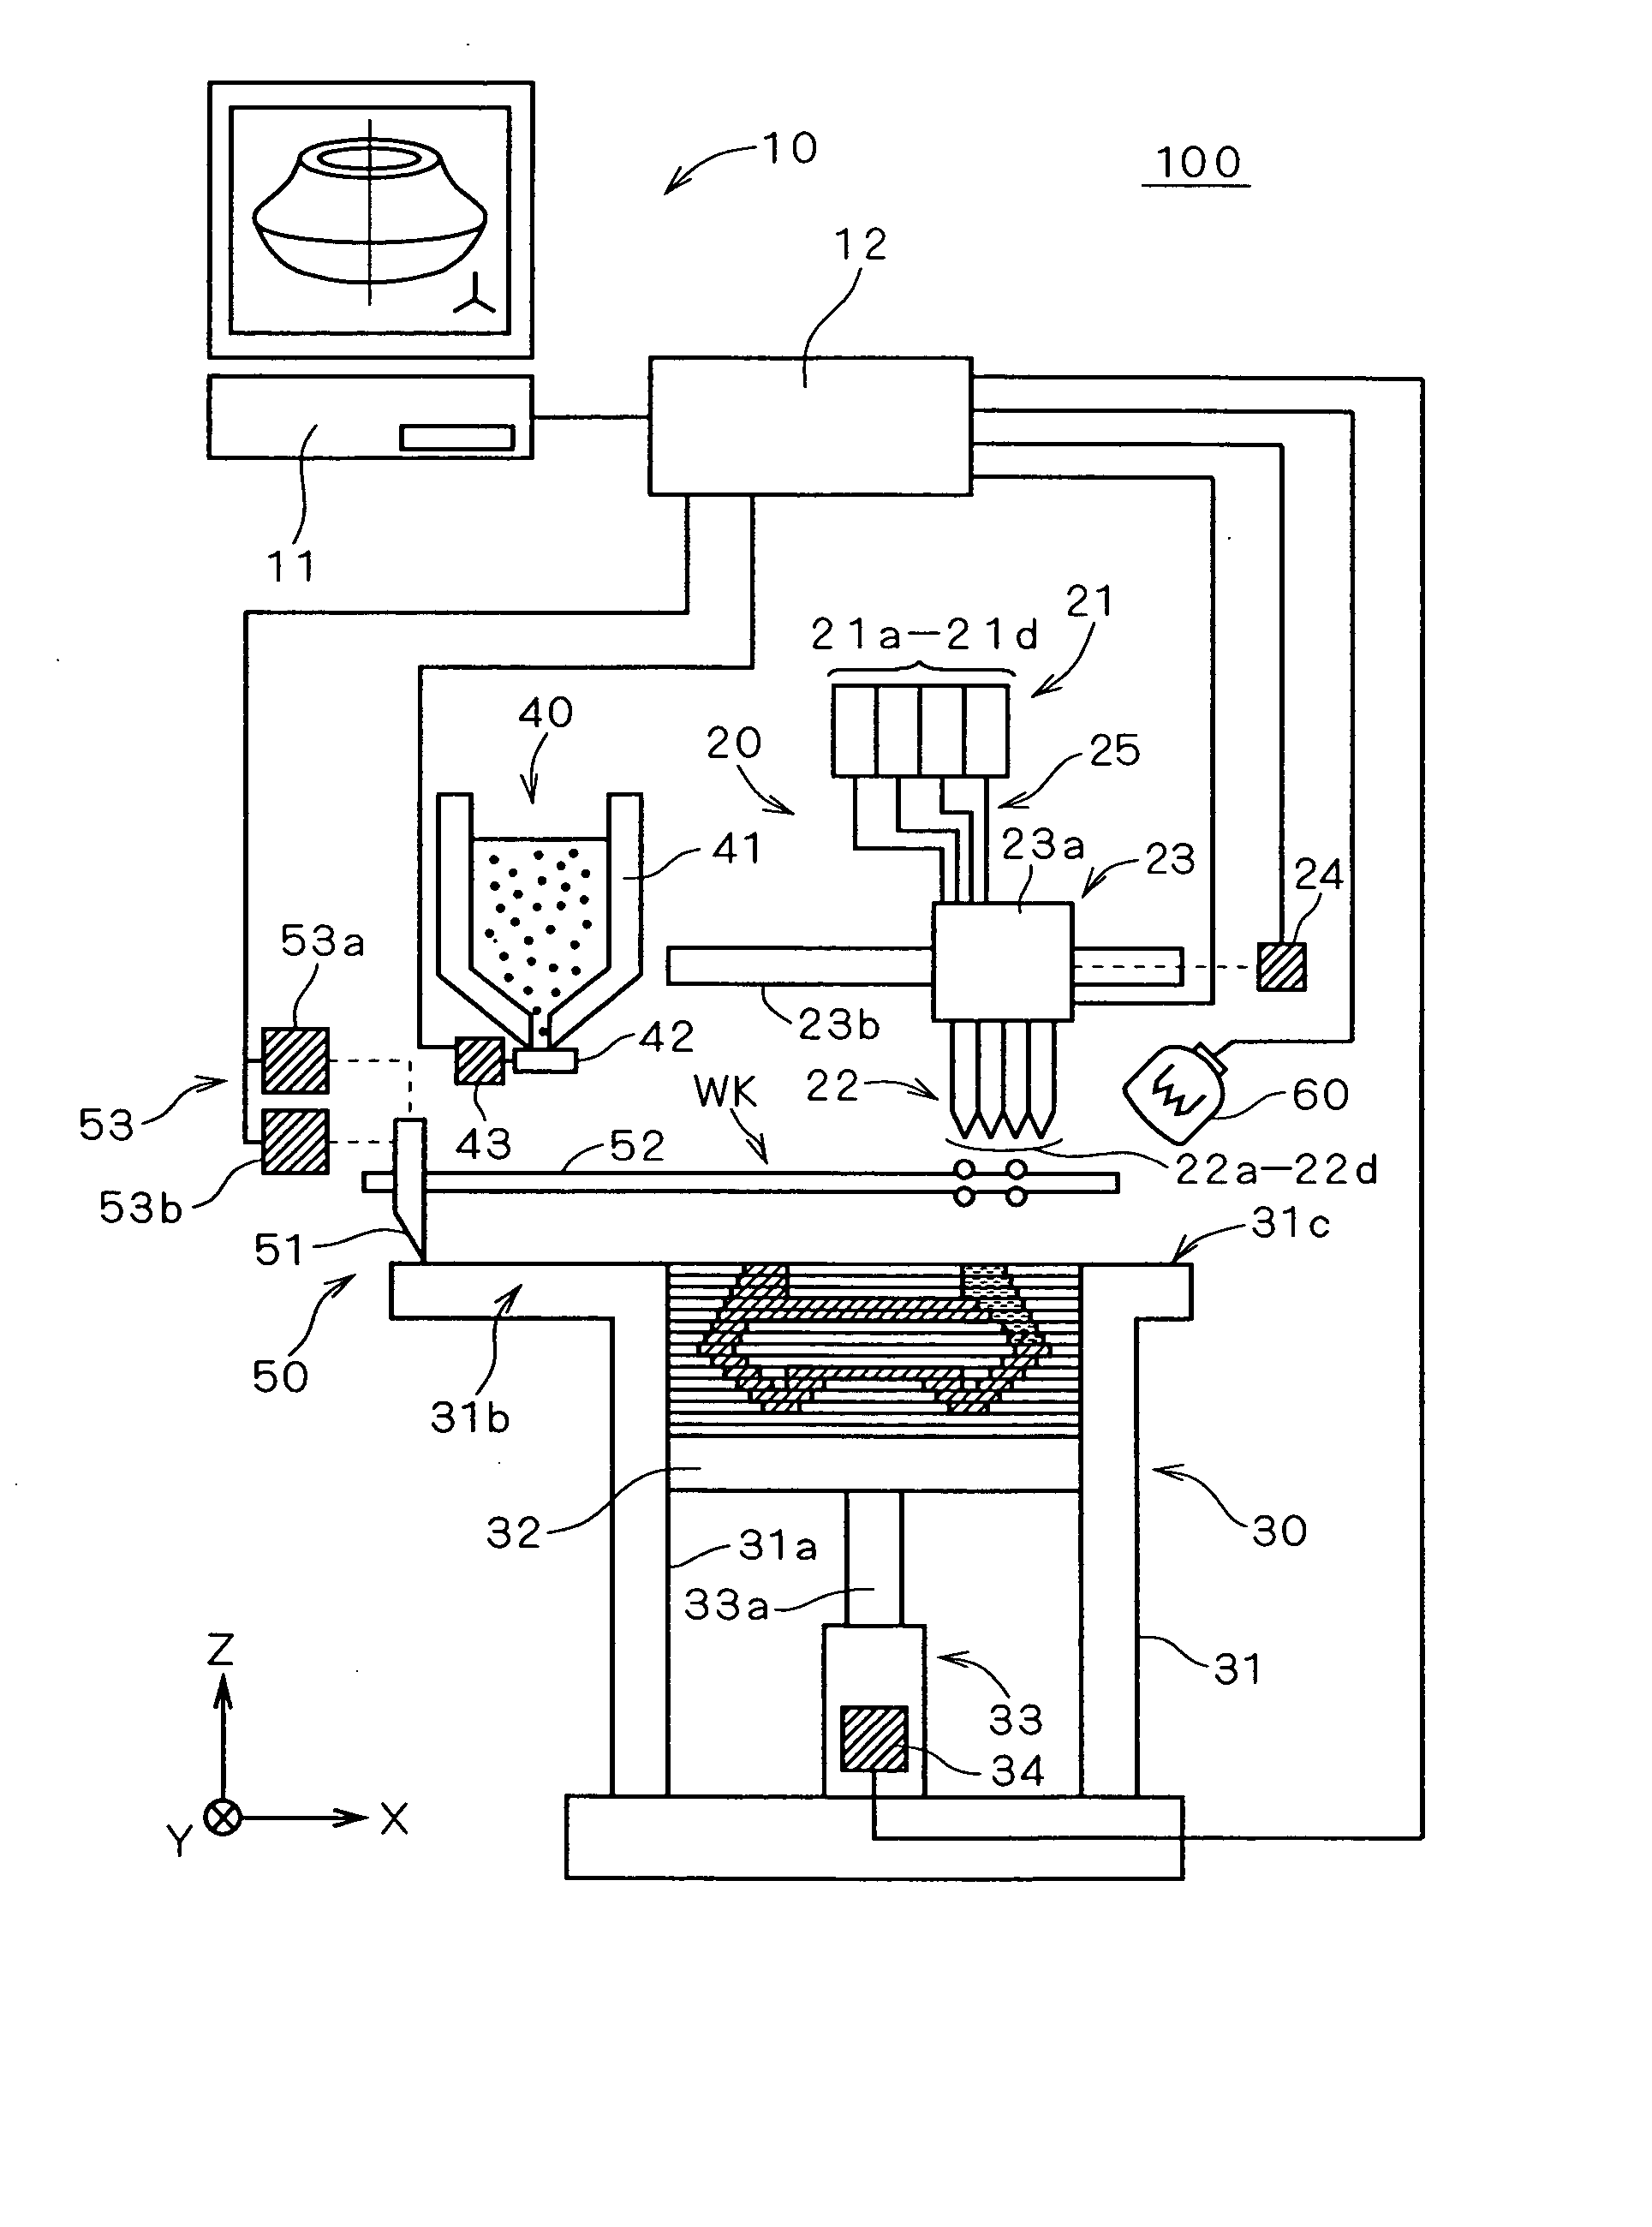 Apparatus for forming a three-dimensional product